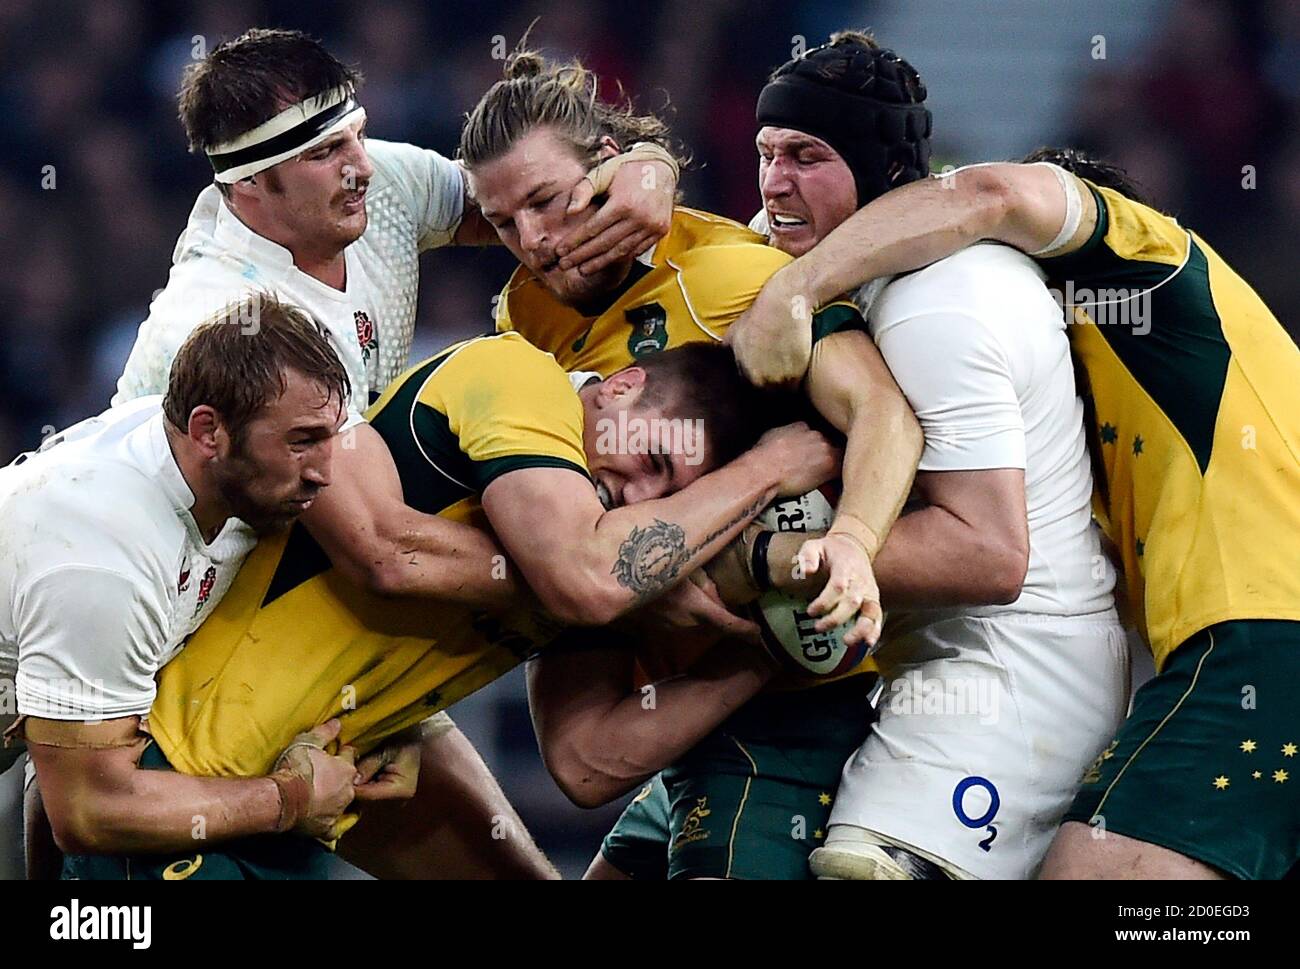 Australia's Rob Horne (C, top) tries to hold onto the ball during their international rugby test match against England at Twickenham Stadium in London, November 29, 2014. REUTERS/Toby Melville (BRITAIN - Tags: SPORT RUGBY TPX IMAGES OF THE DAY) Stock Photo